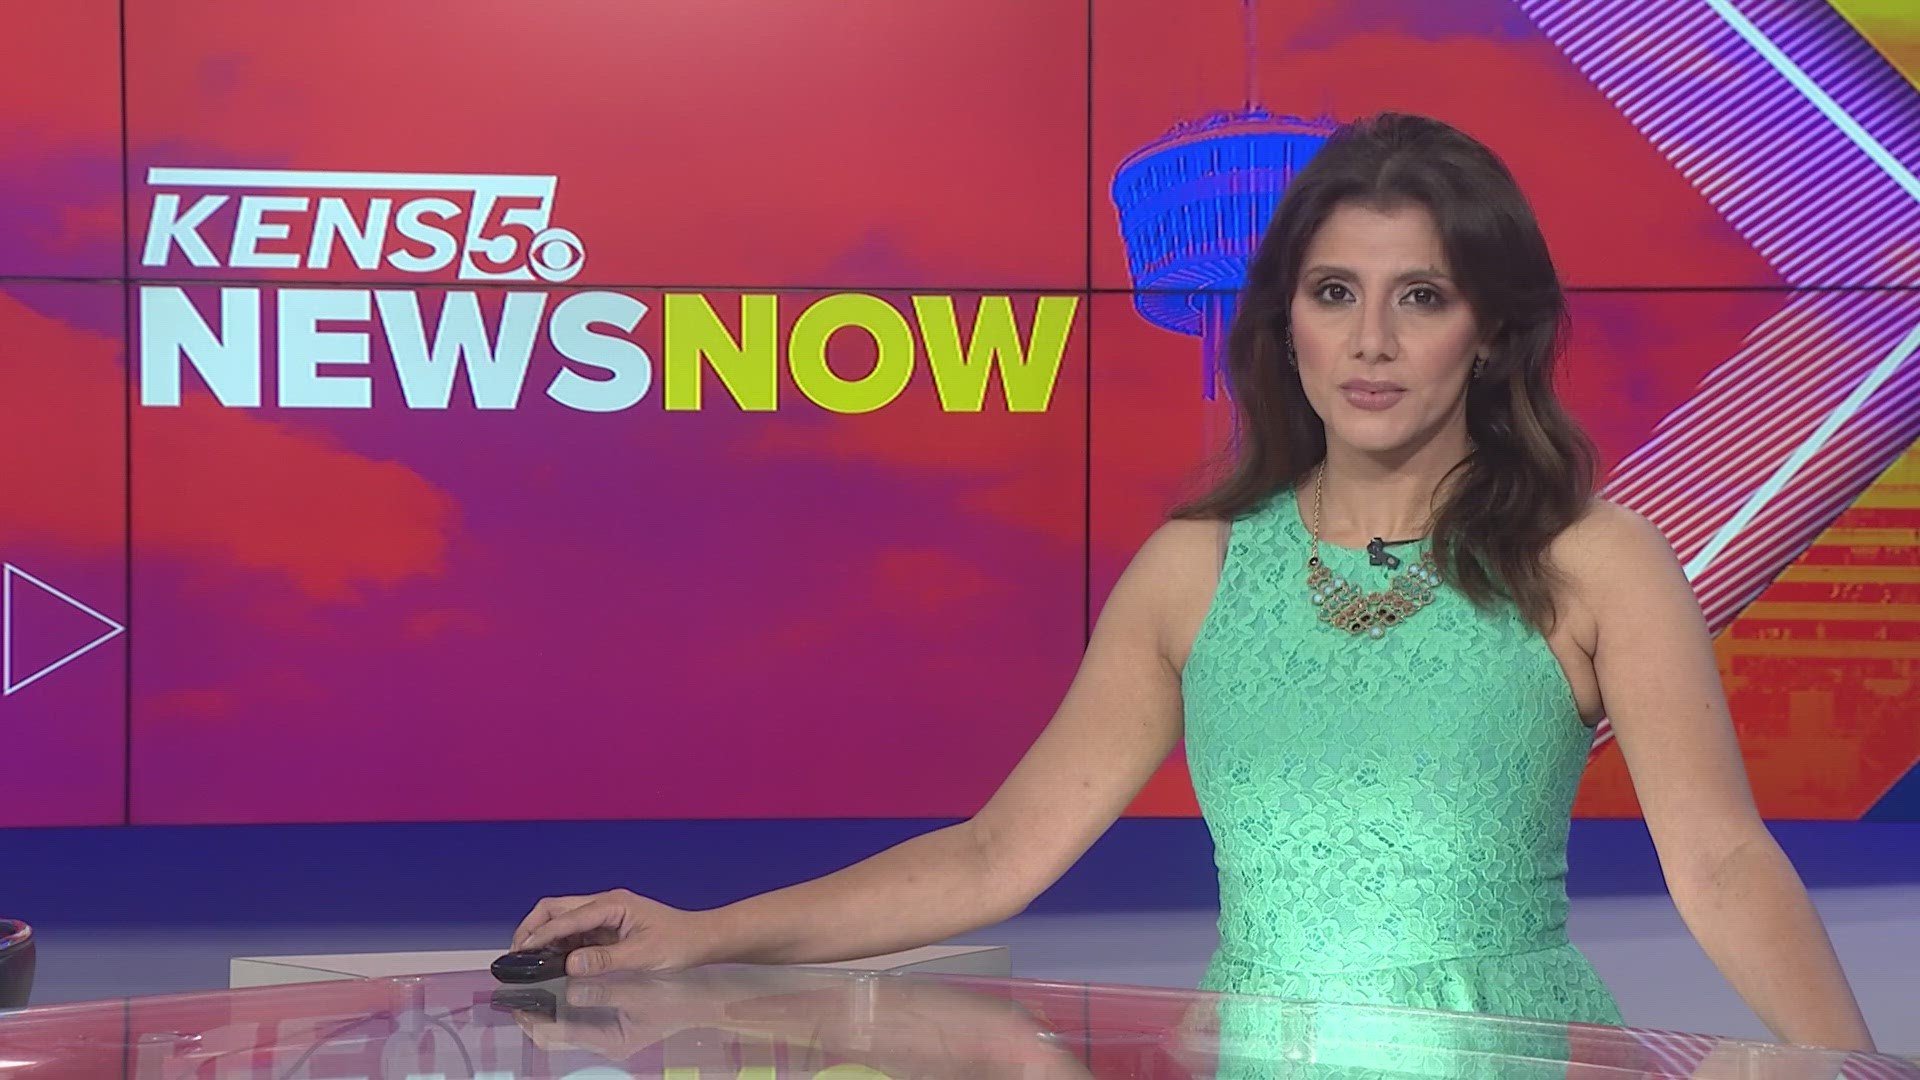 Follow us here to get the latest top headlines with KENS 5 anchor Sarah Forgany every weekday!